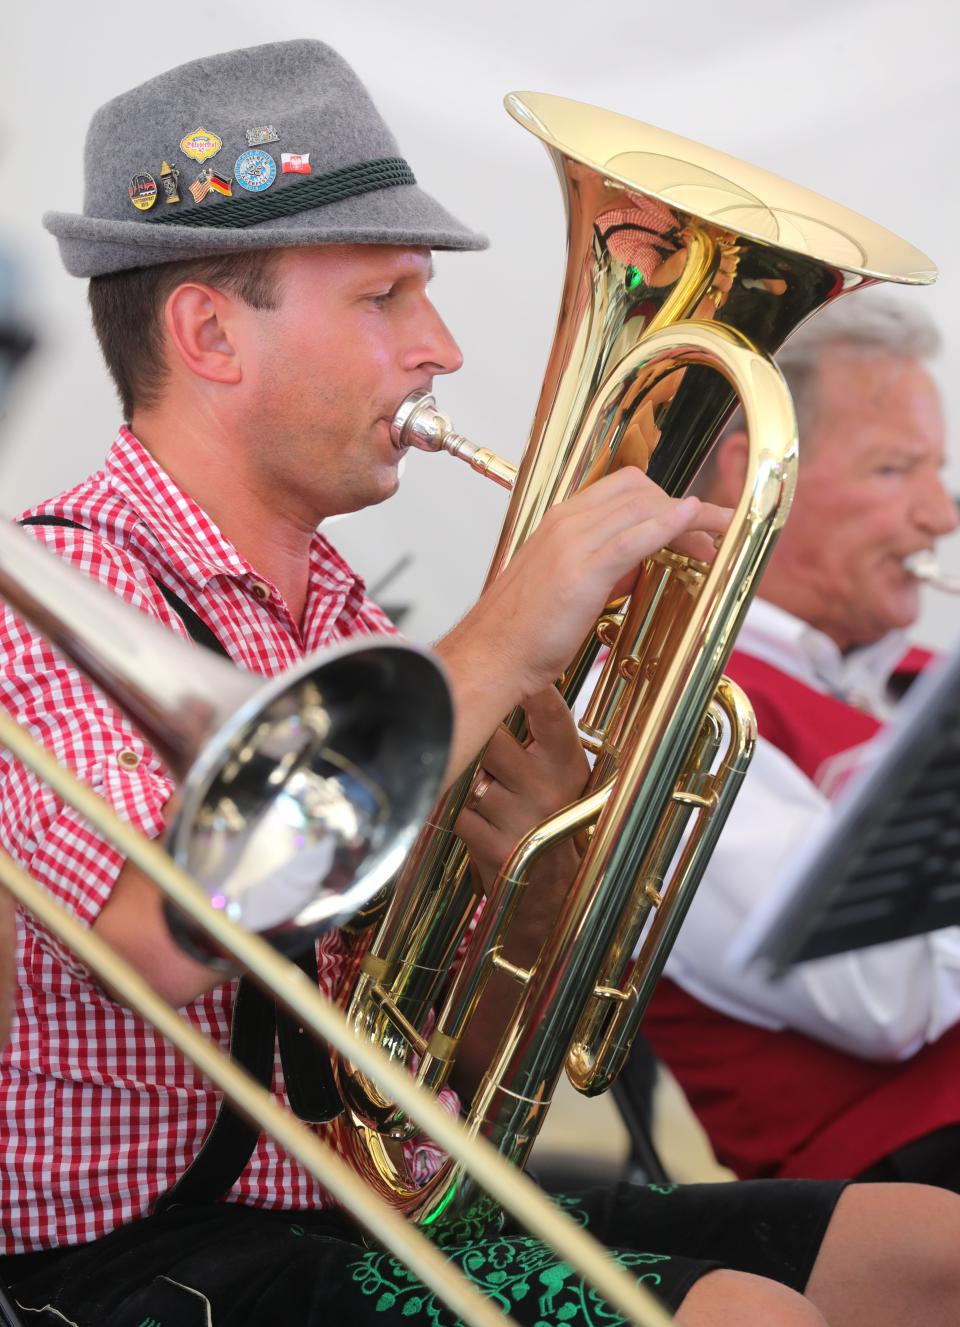 Enjoy German music, food, drinks and culture at the Donauschwaben Oktoberfest this weekend.